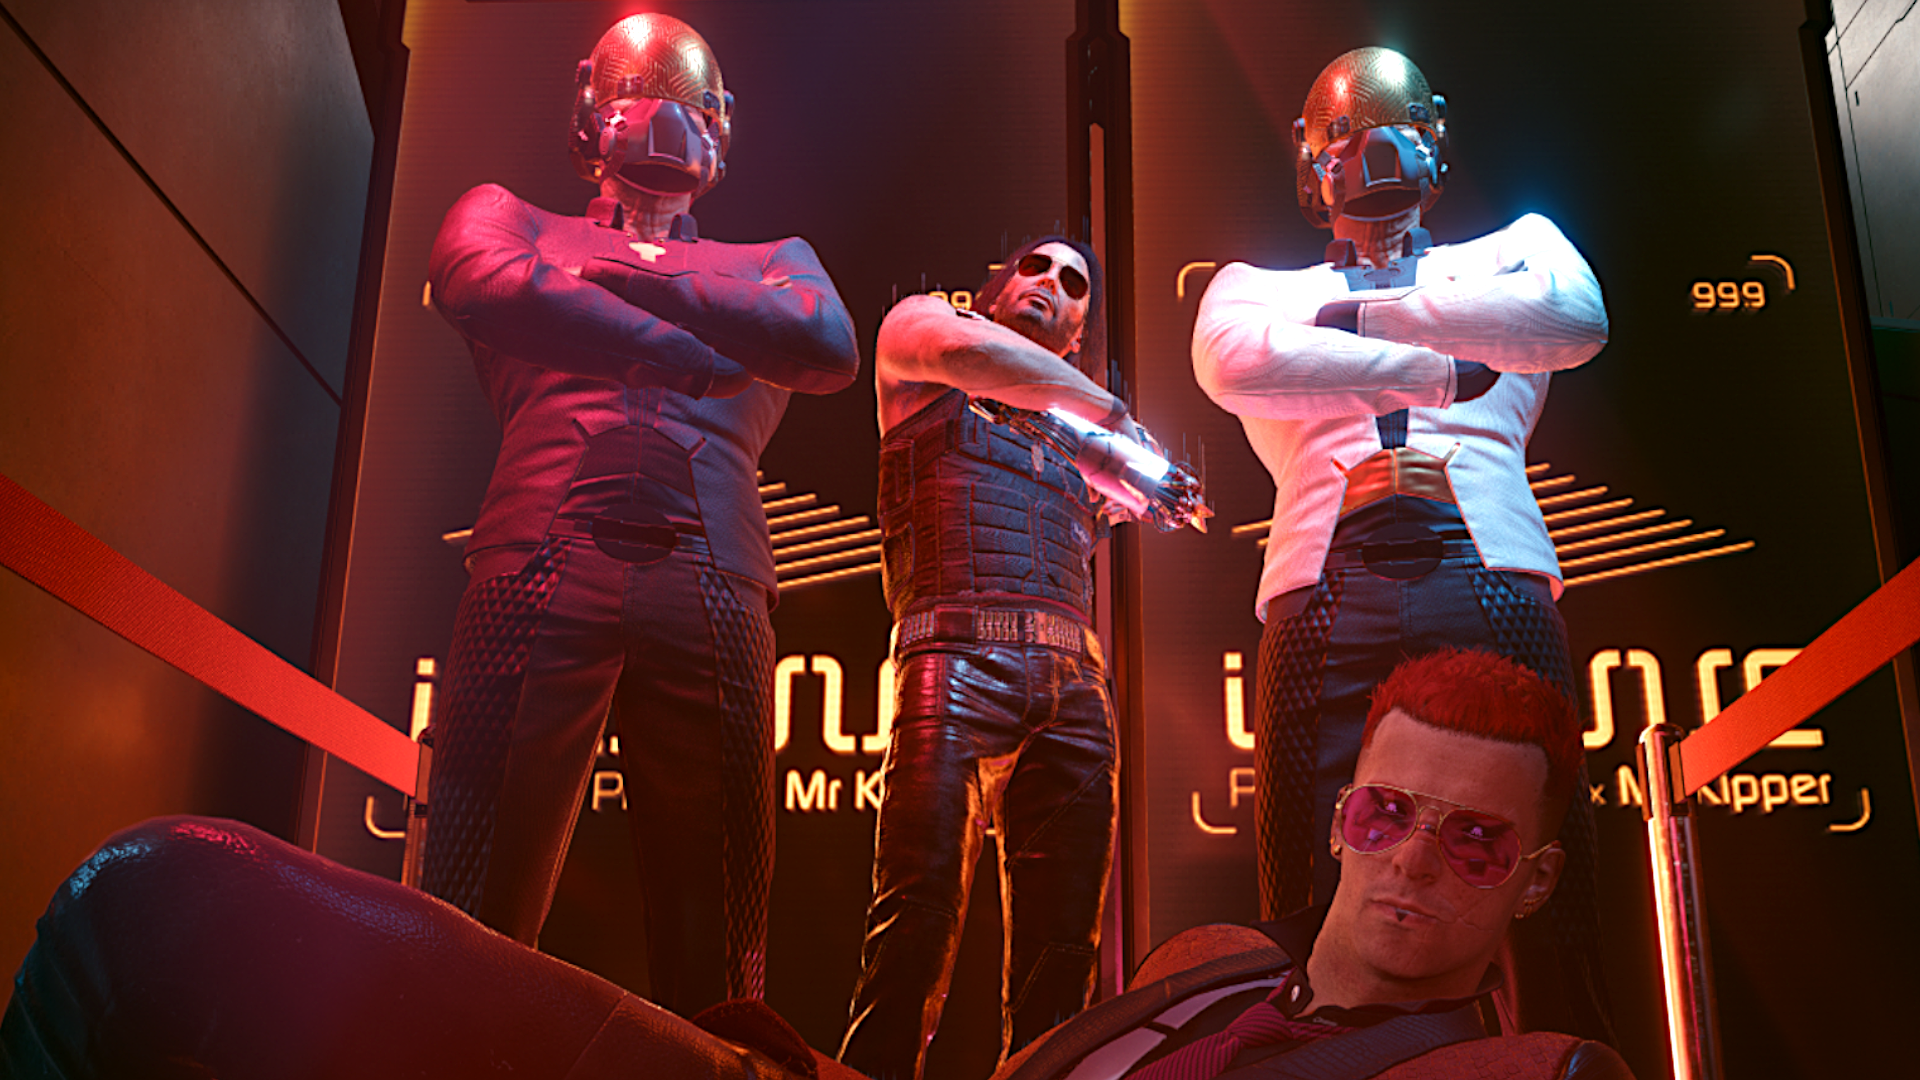 An image of V, the protagonist of Cyberpunk 2077, laying on the floor while punk rocker and anarchist Jhonny Silverhand poses with two behelmeted DJs resembling Daft Punk.